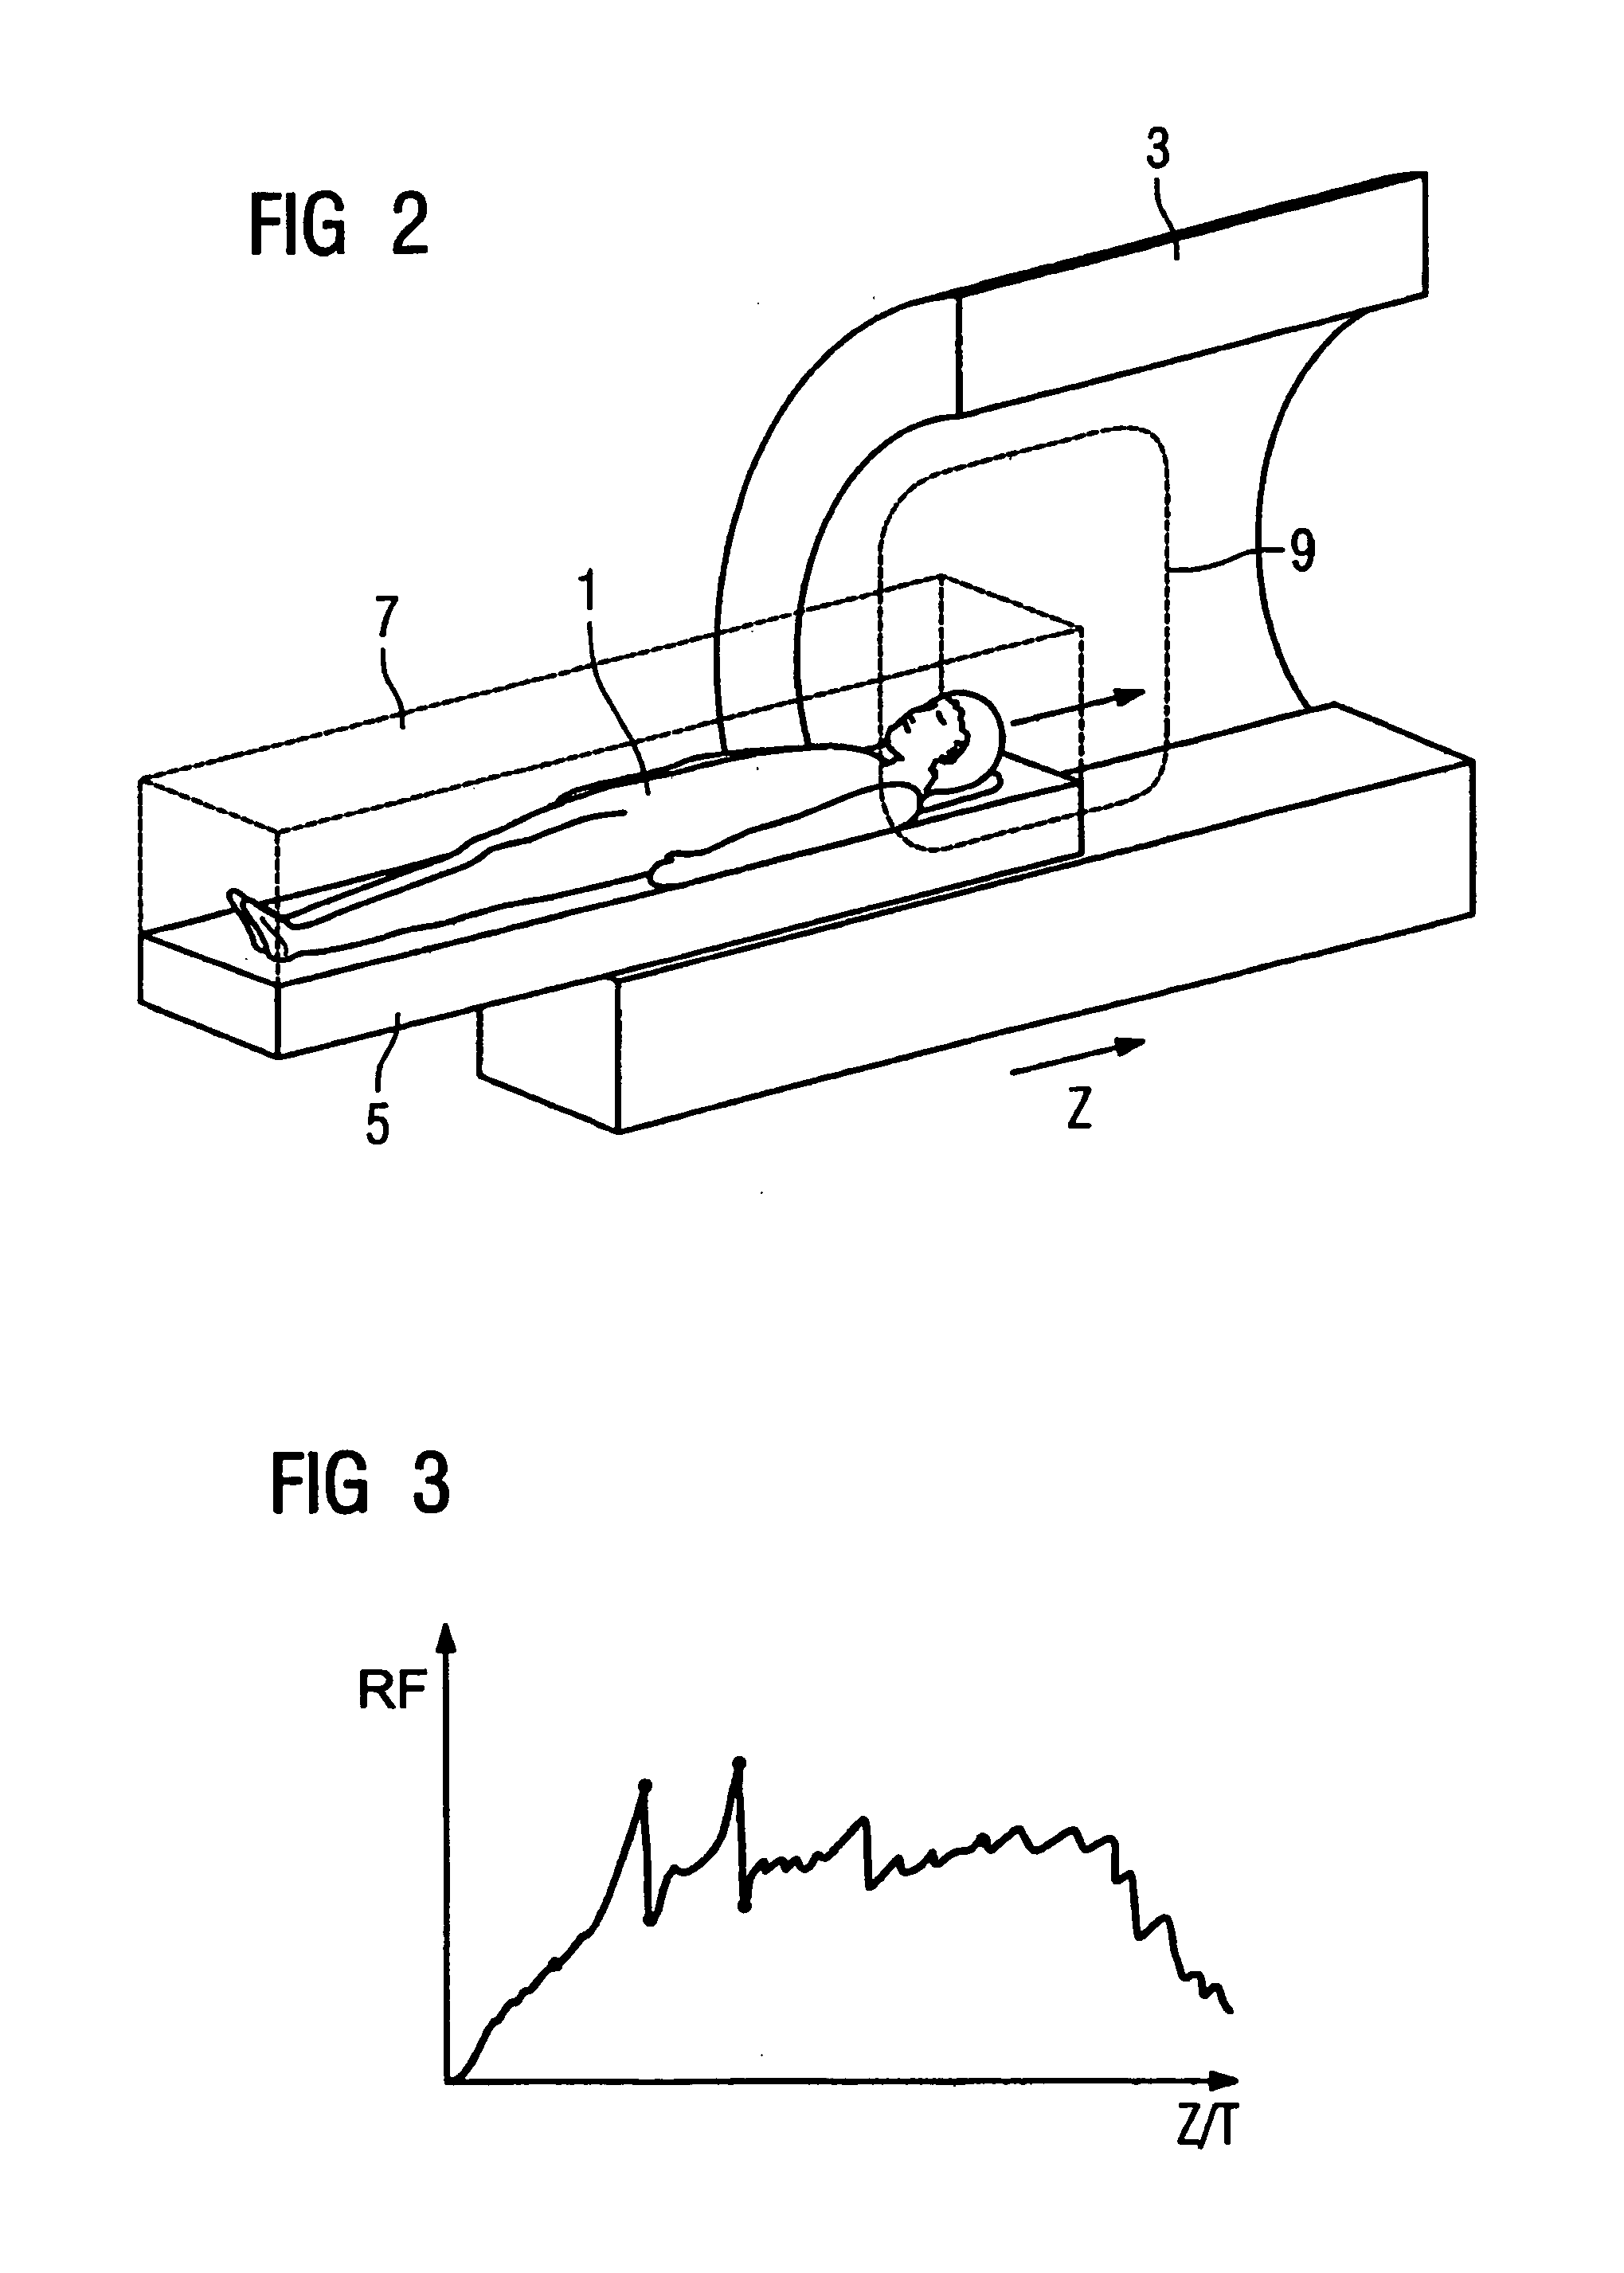 Method for implementation of a magnetic resonance examination of a patient